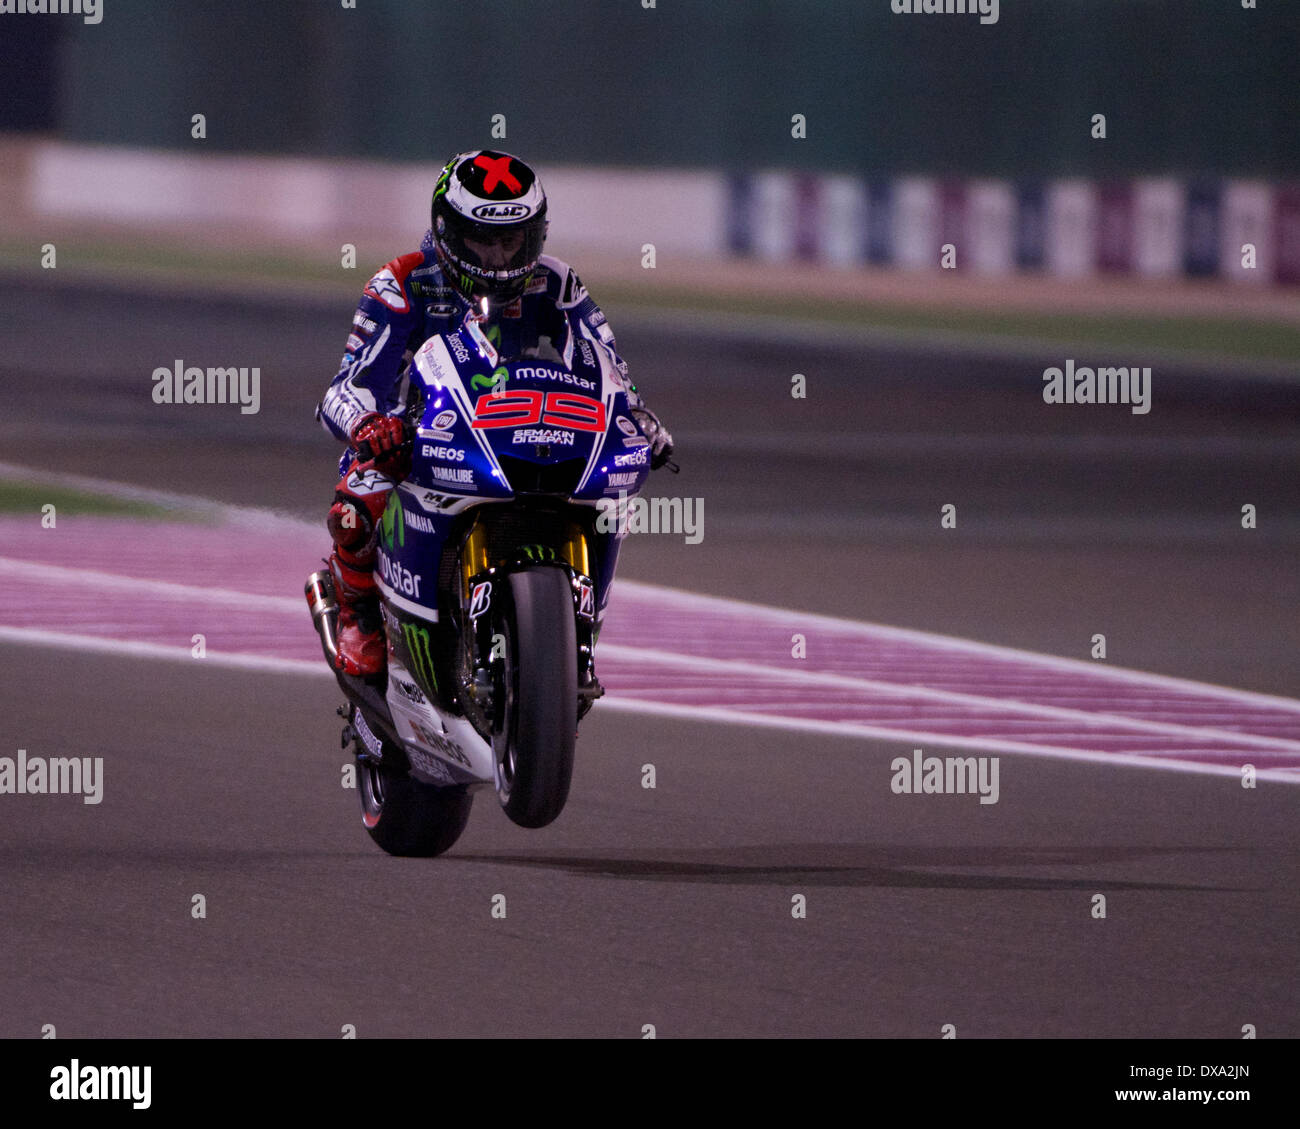 Losail Circuit, Qatar. 20th March 2014.  Jorge Lorenzo the Yamaha Factory Racing rider pulls a wheelie as he leaves the Losail Pit Lane on his Yamaha YZR-M1 for the first free practice session on the 2014 FIM MotoGP World Championship Credit:  Tom Morgan/Alamy Live News Stock Photo